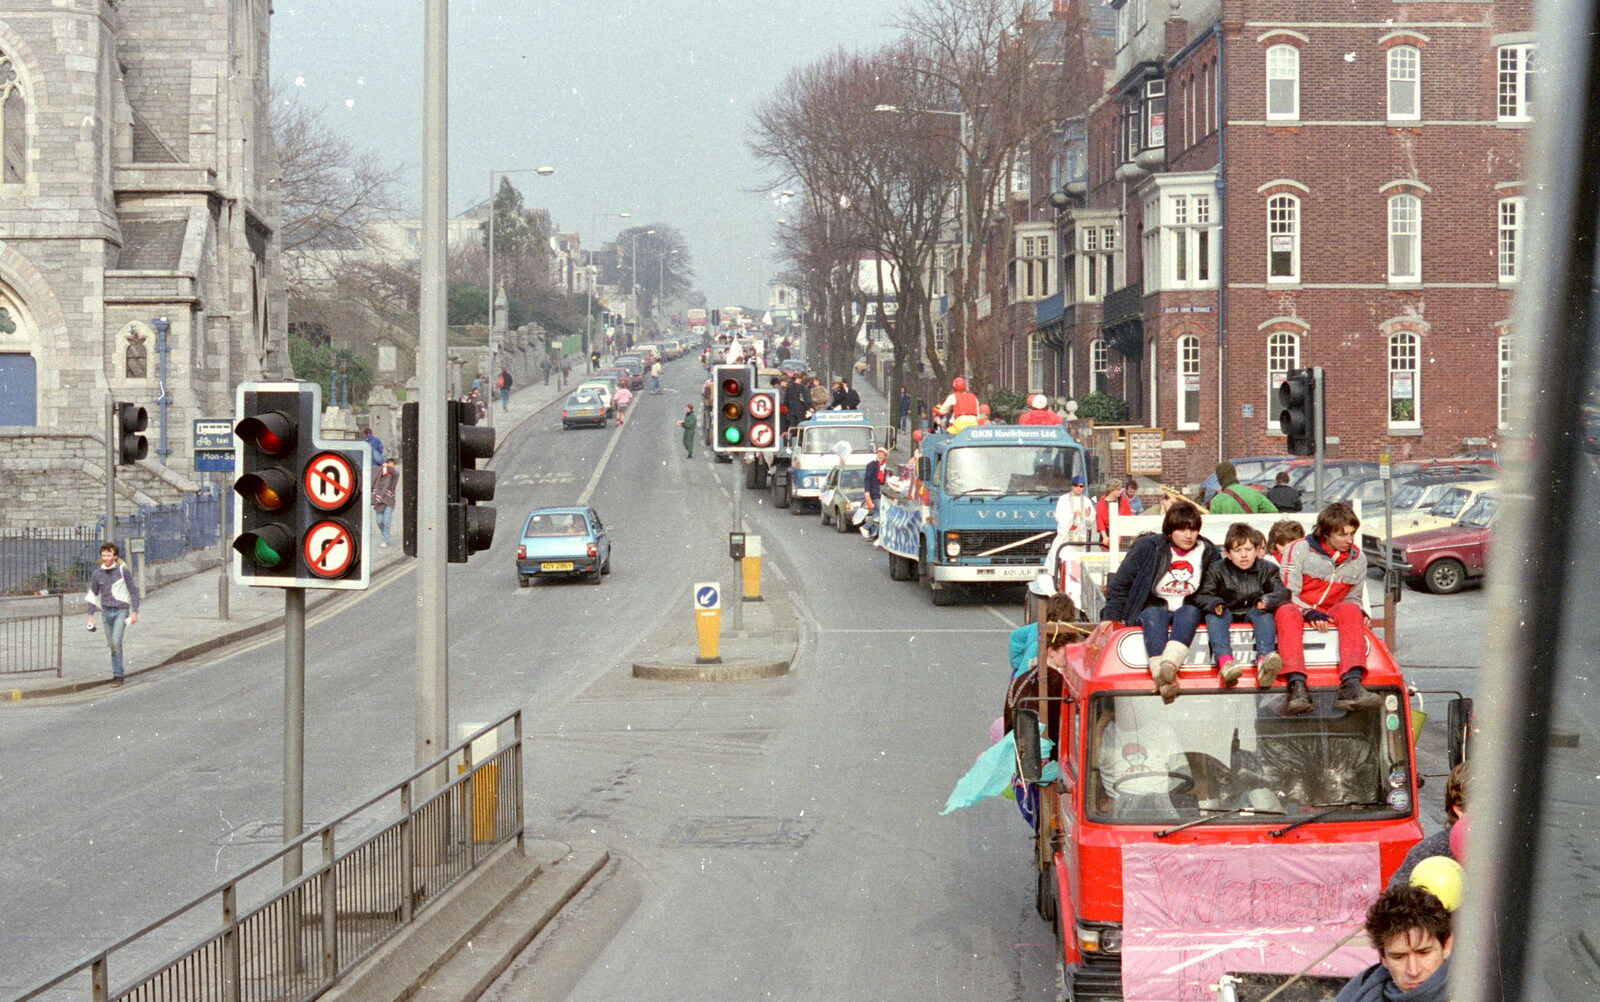 The procession passes Portland Place and Sherwell from Uni: PPSU "Jazz" RAG Street Parade, Plymouth, Devon - 17th February 1986